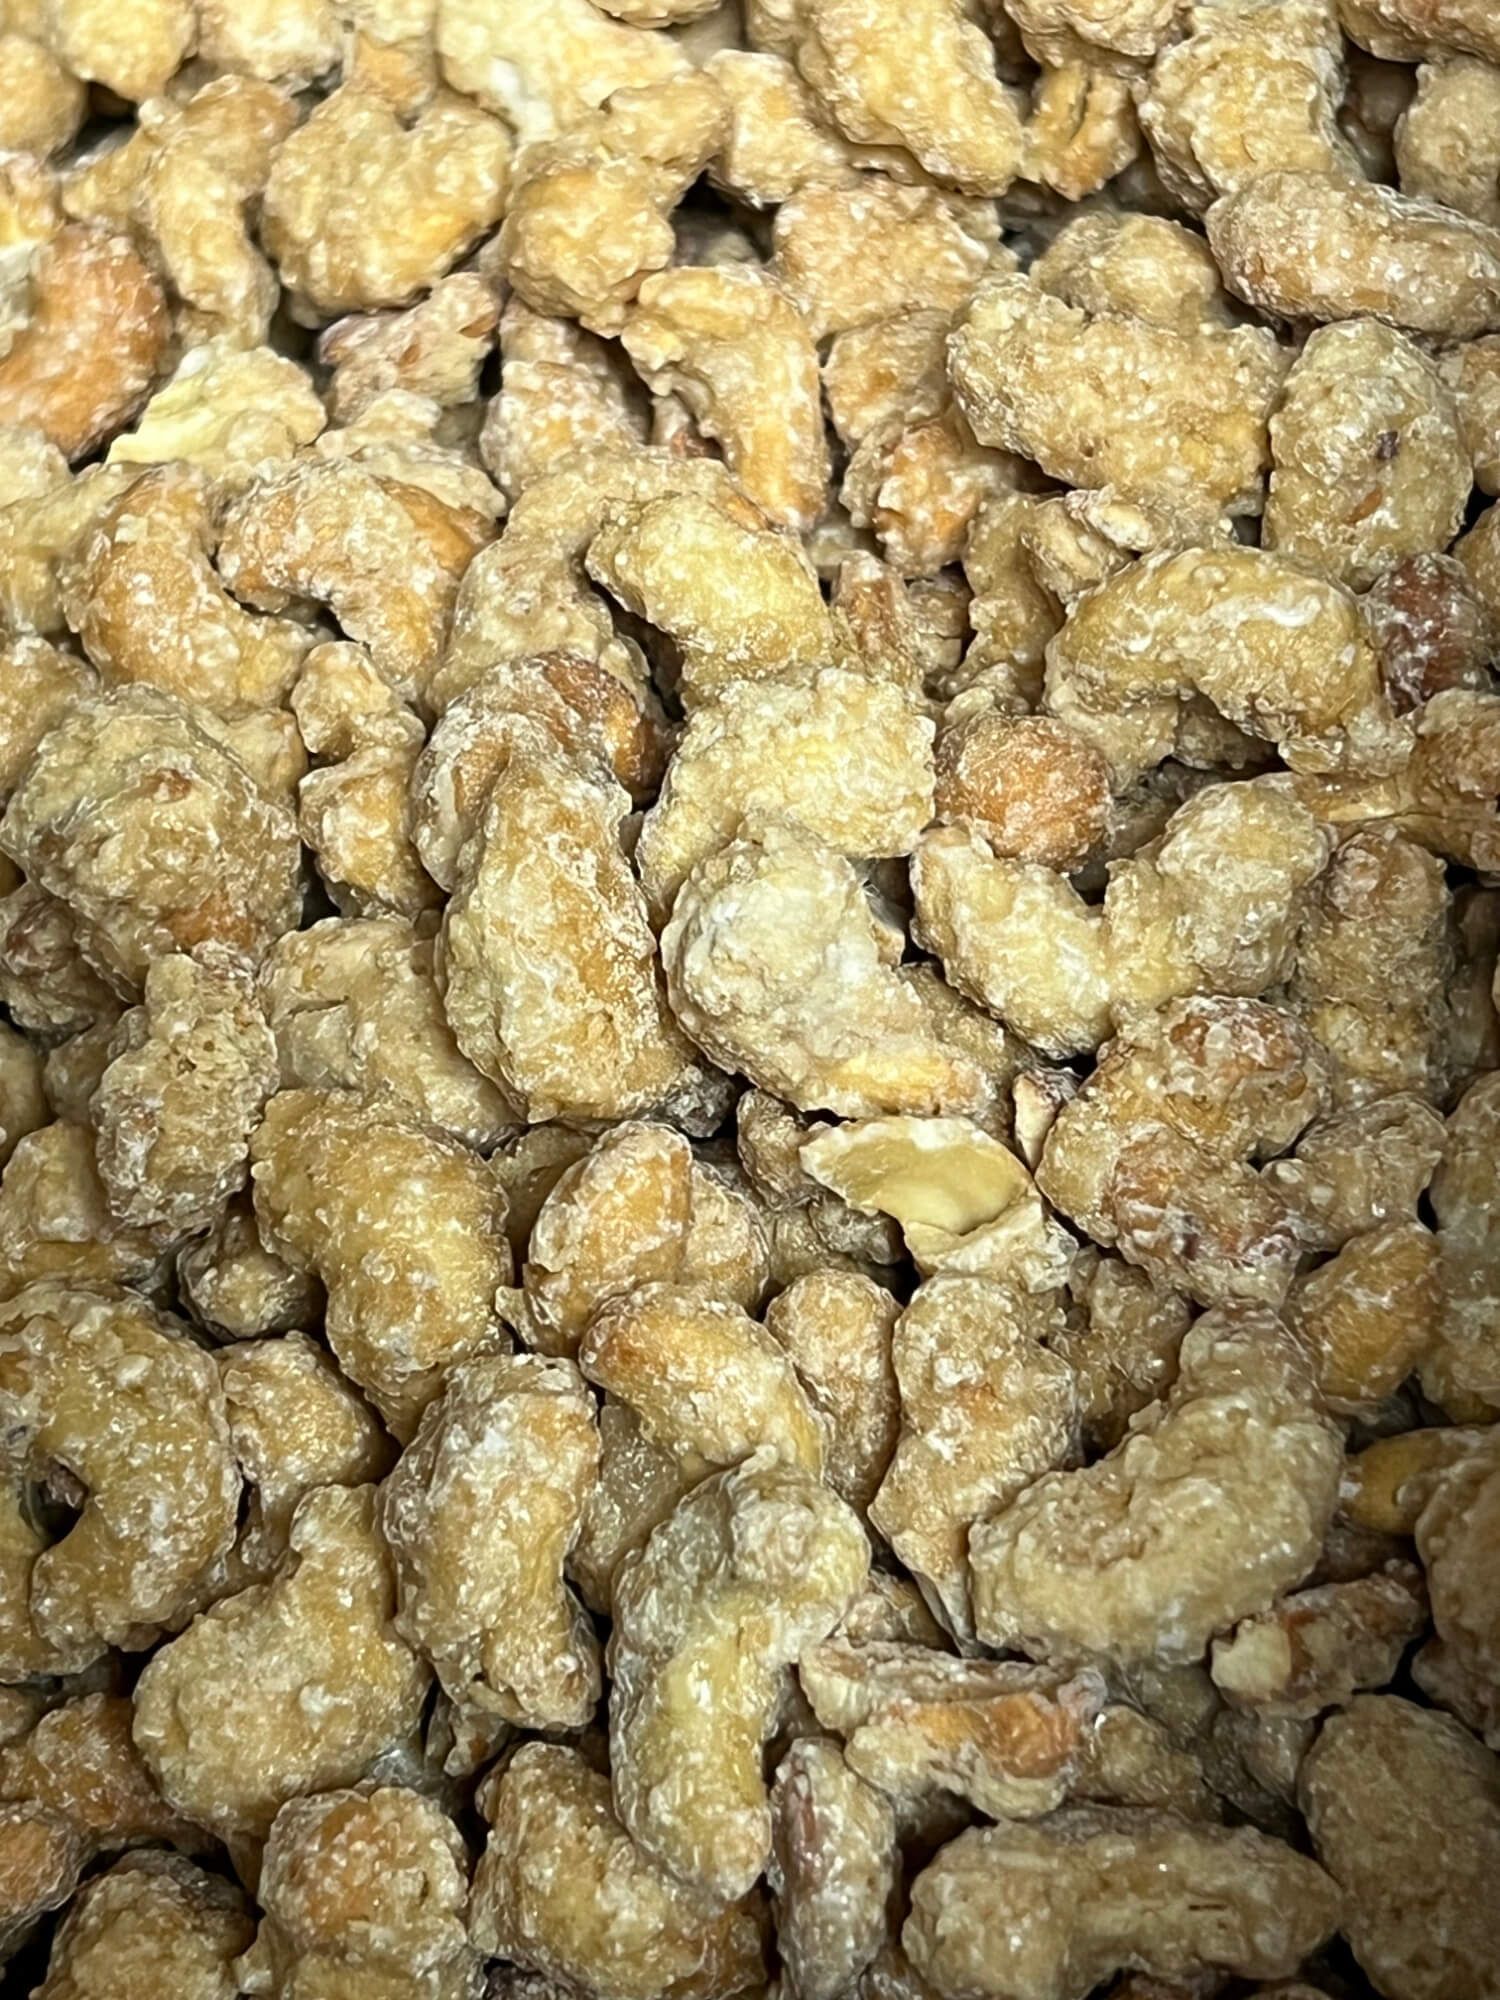 A close up of a pile of caramelized walnuts.